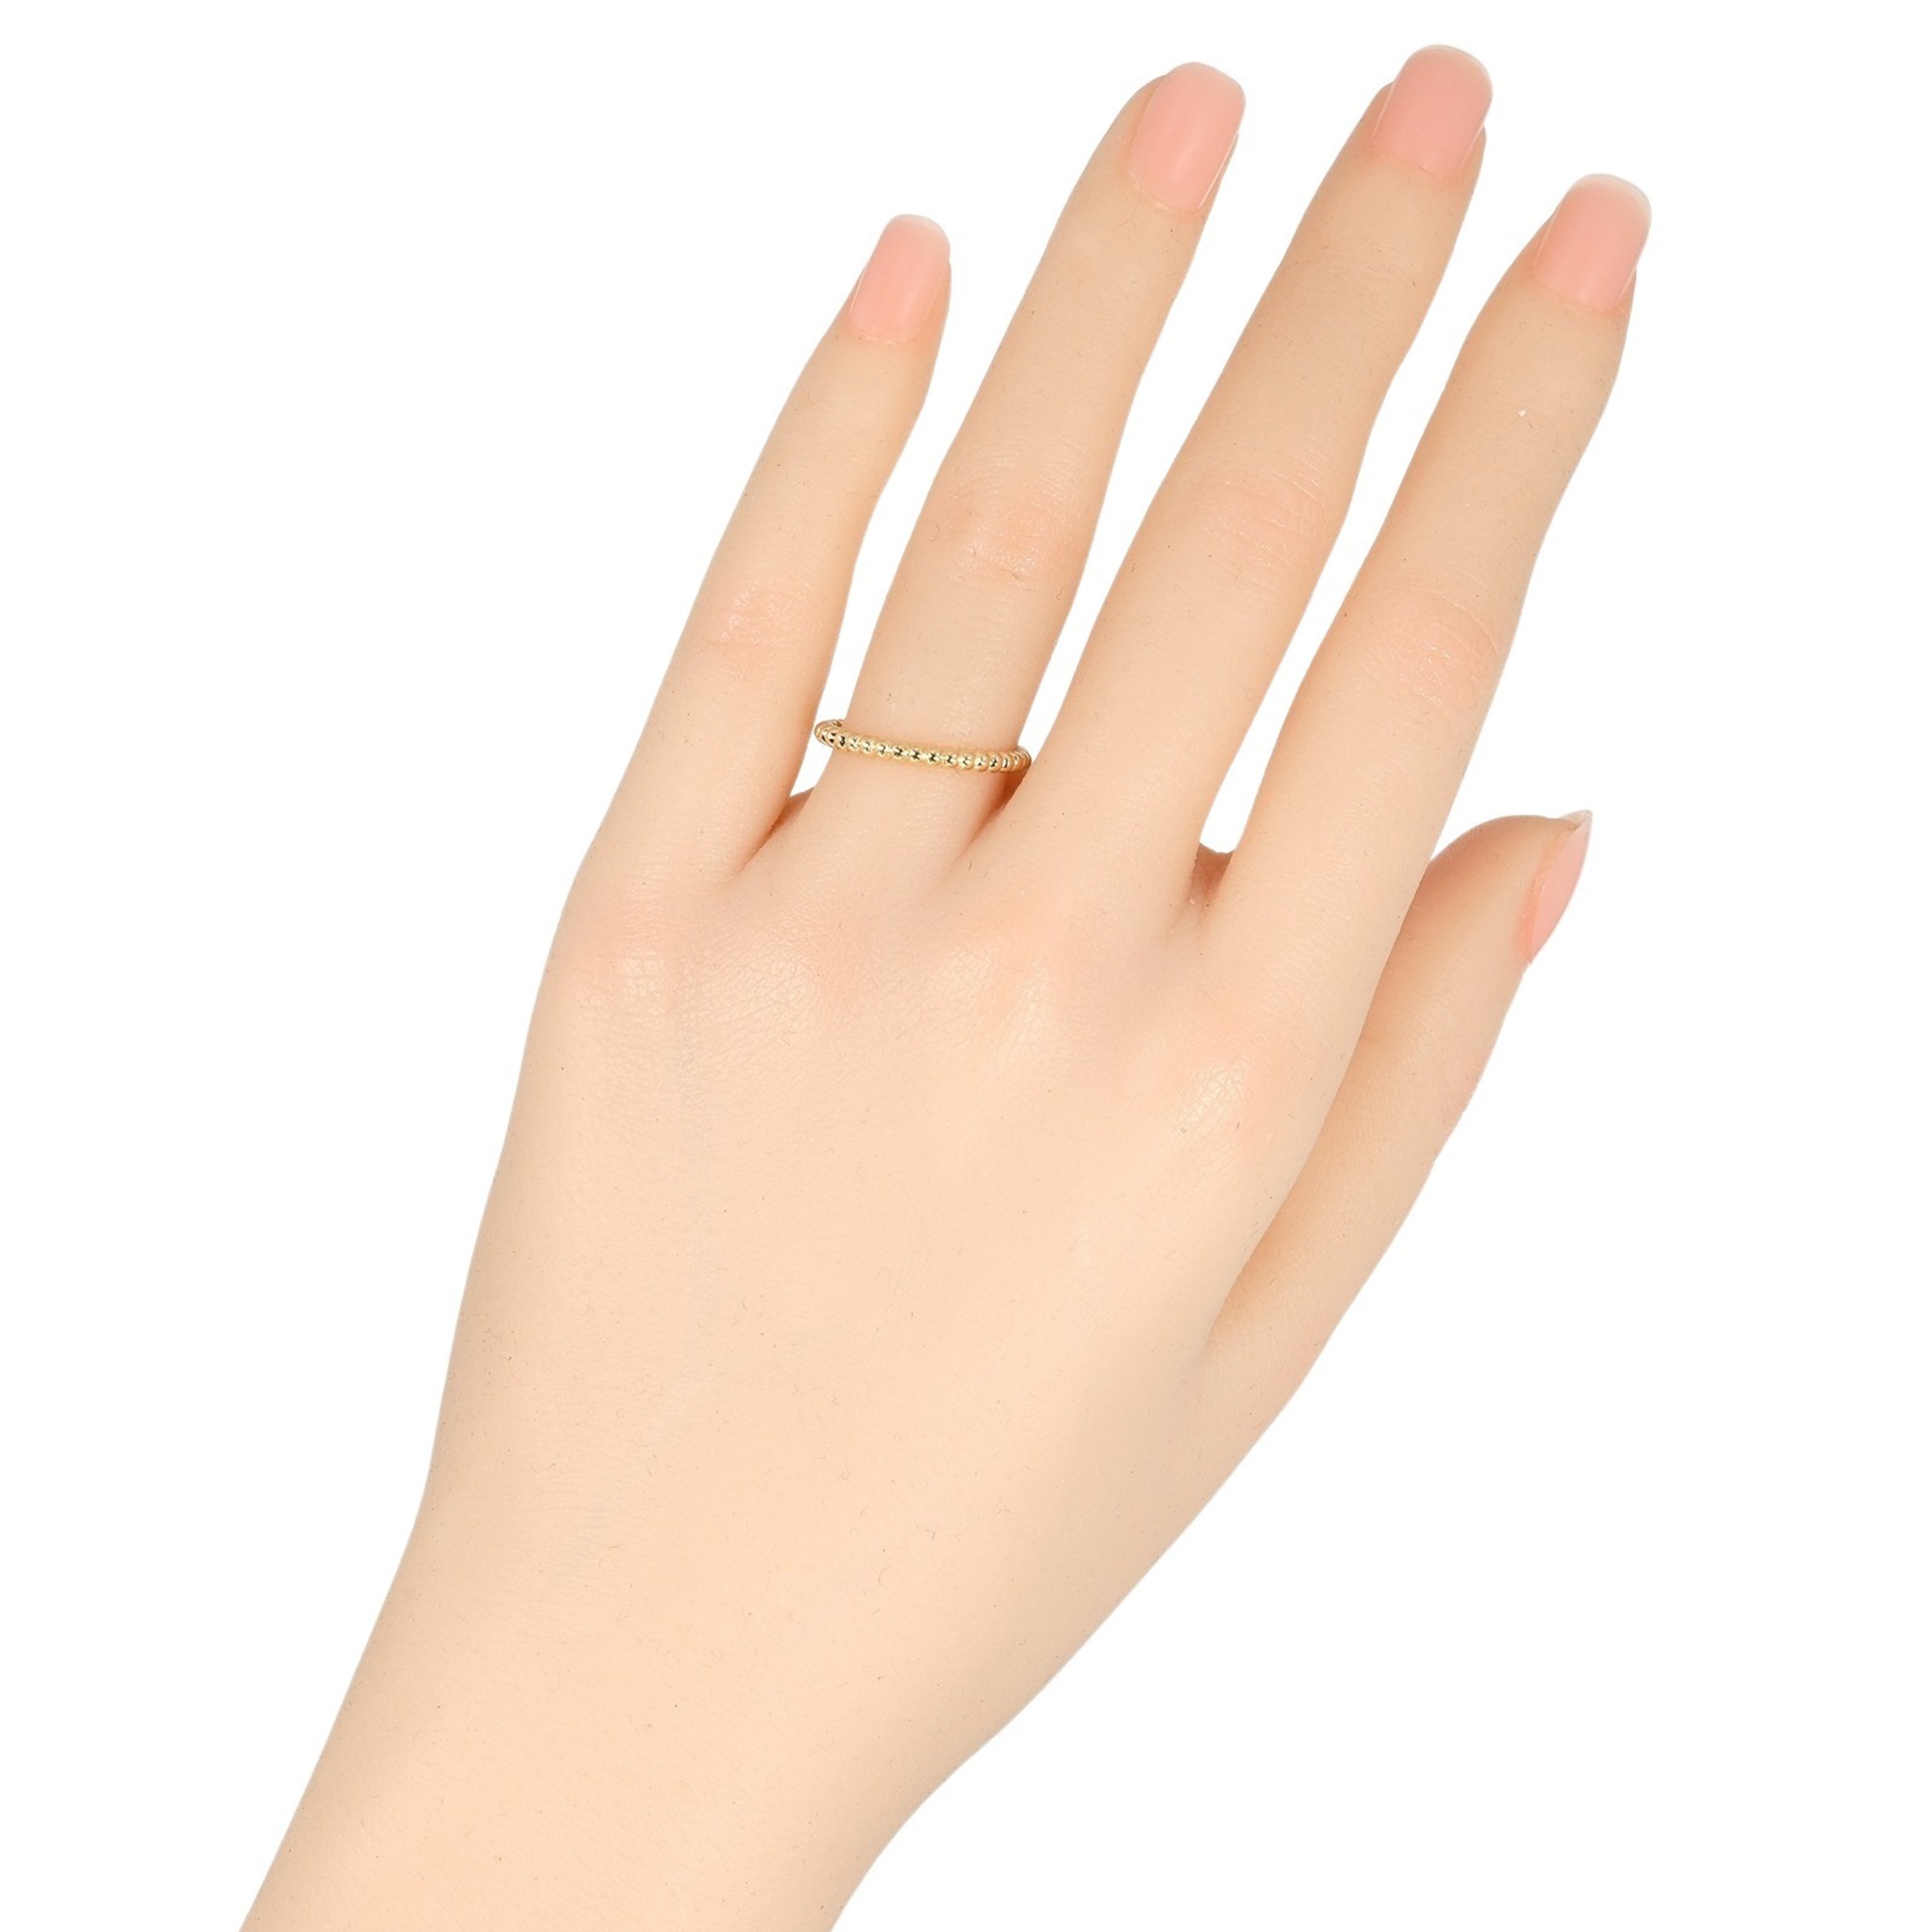 Van Cleef & Arpels Perlée Small 11.5 Ring, K18 Yellow Gold, approx. 2.03g